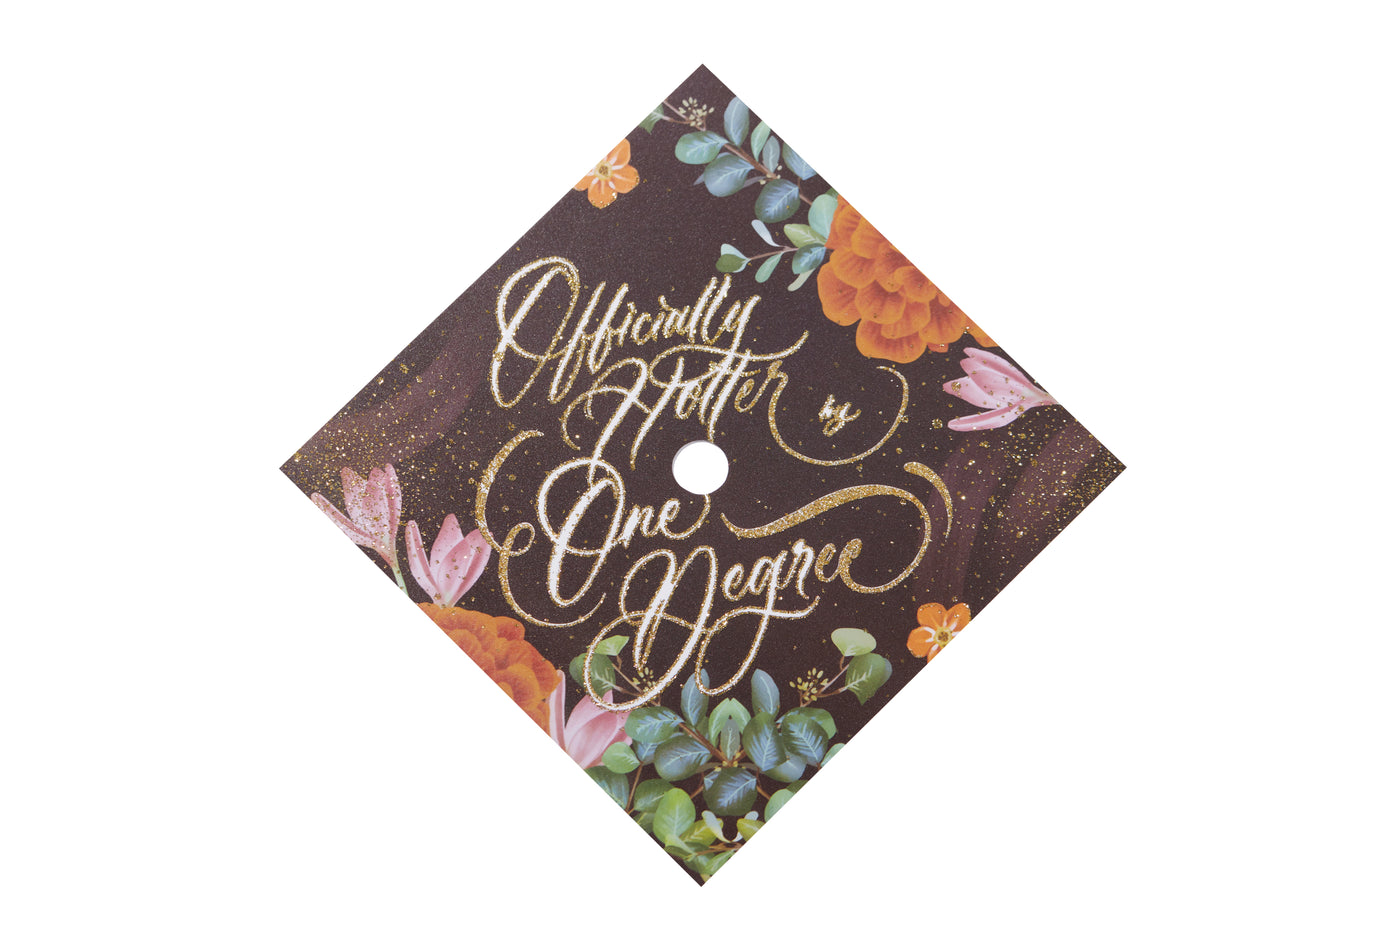 Graduation cap topper art print, Officially hotter by one degree